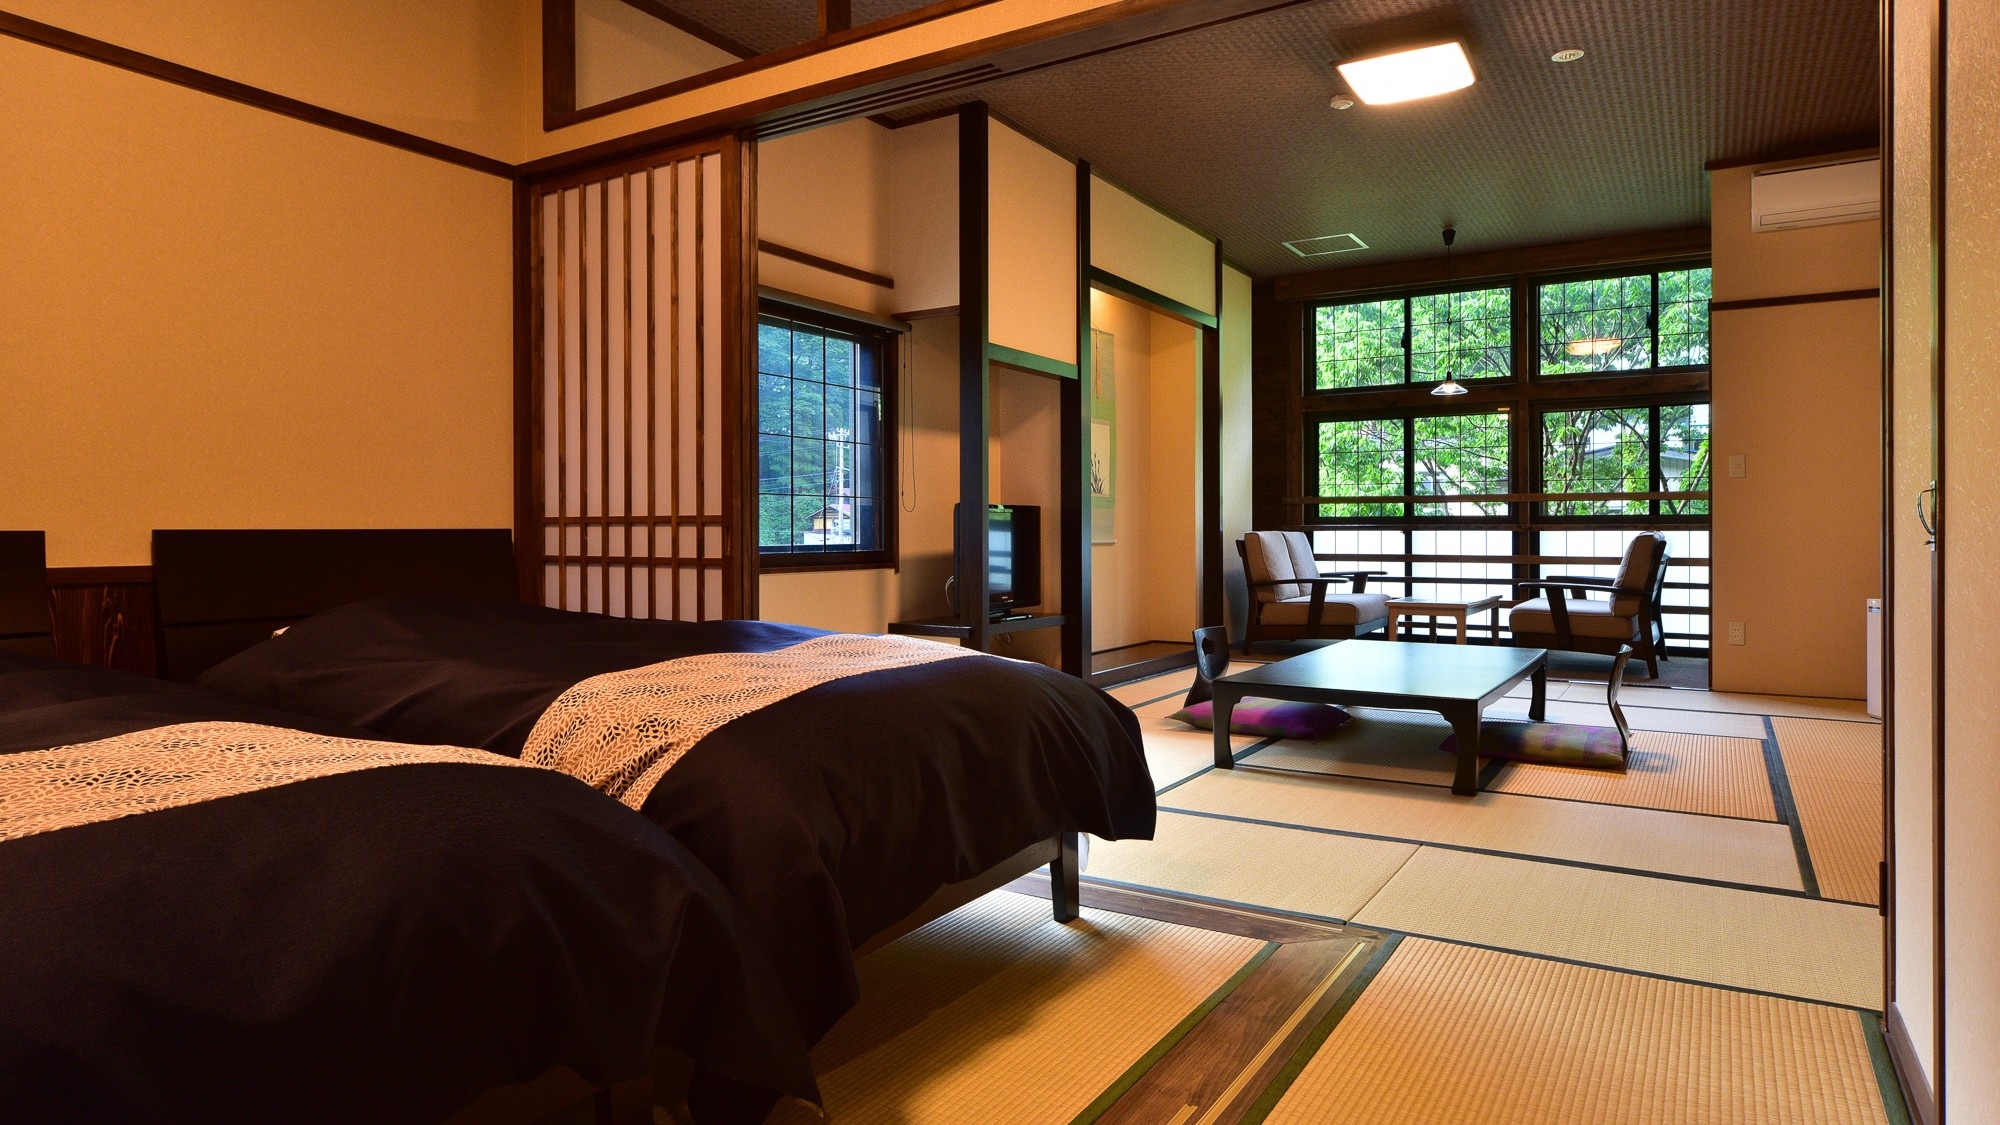 * Non-smoking room [Japanese-Western style room with two rooms] Twin bedroom + Japanese-style room 10 tatami mats